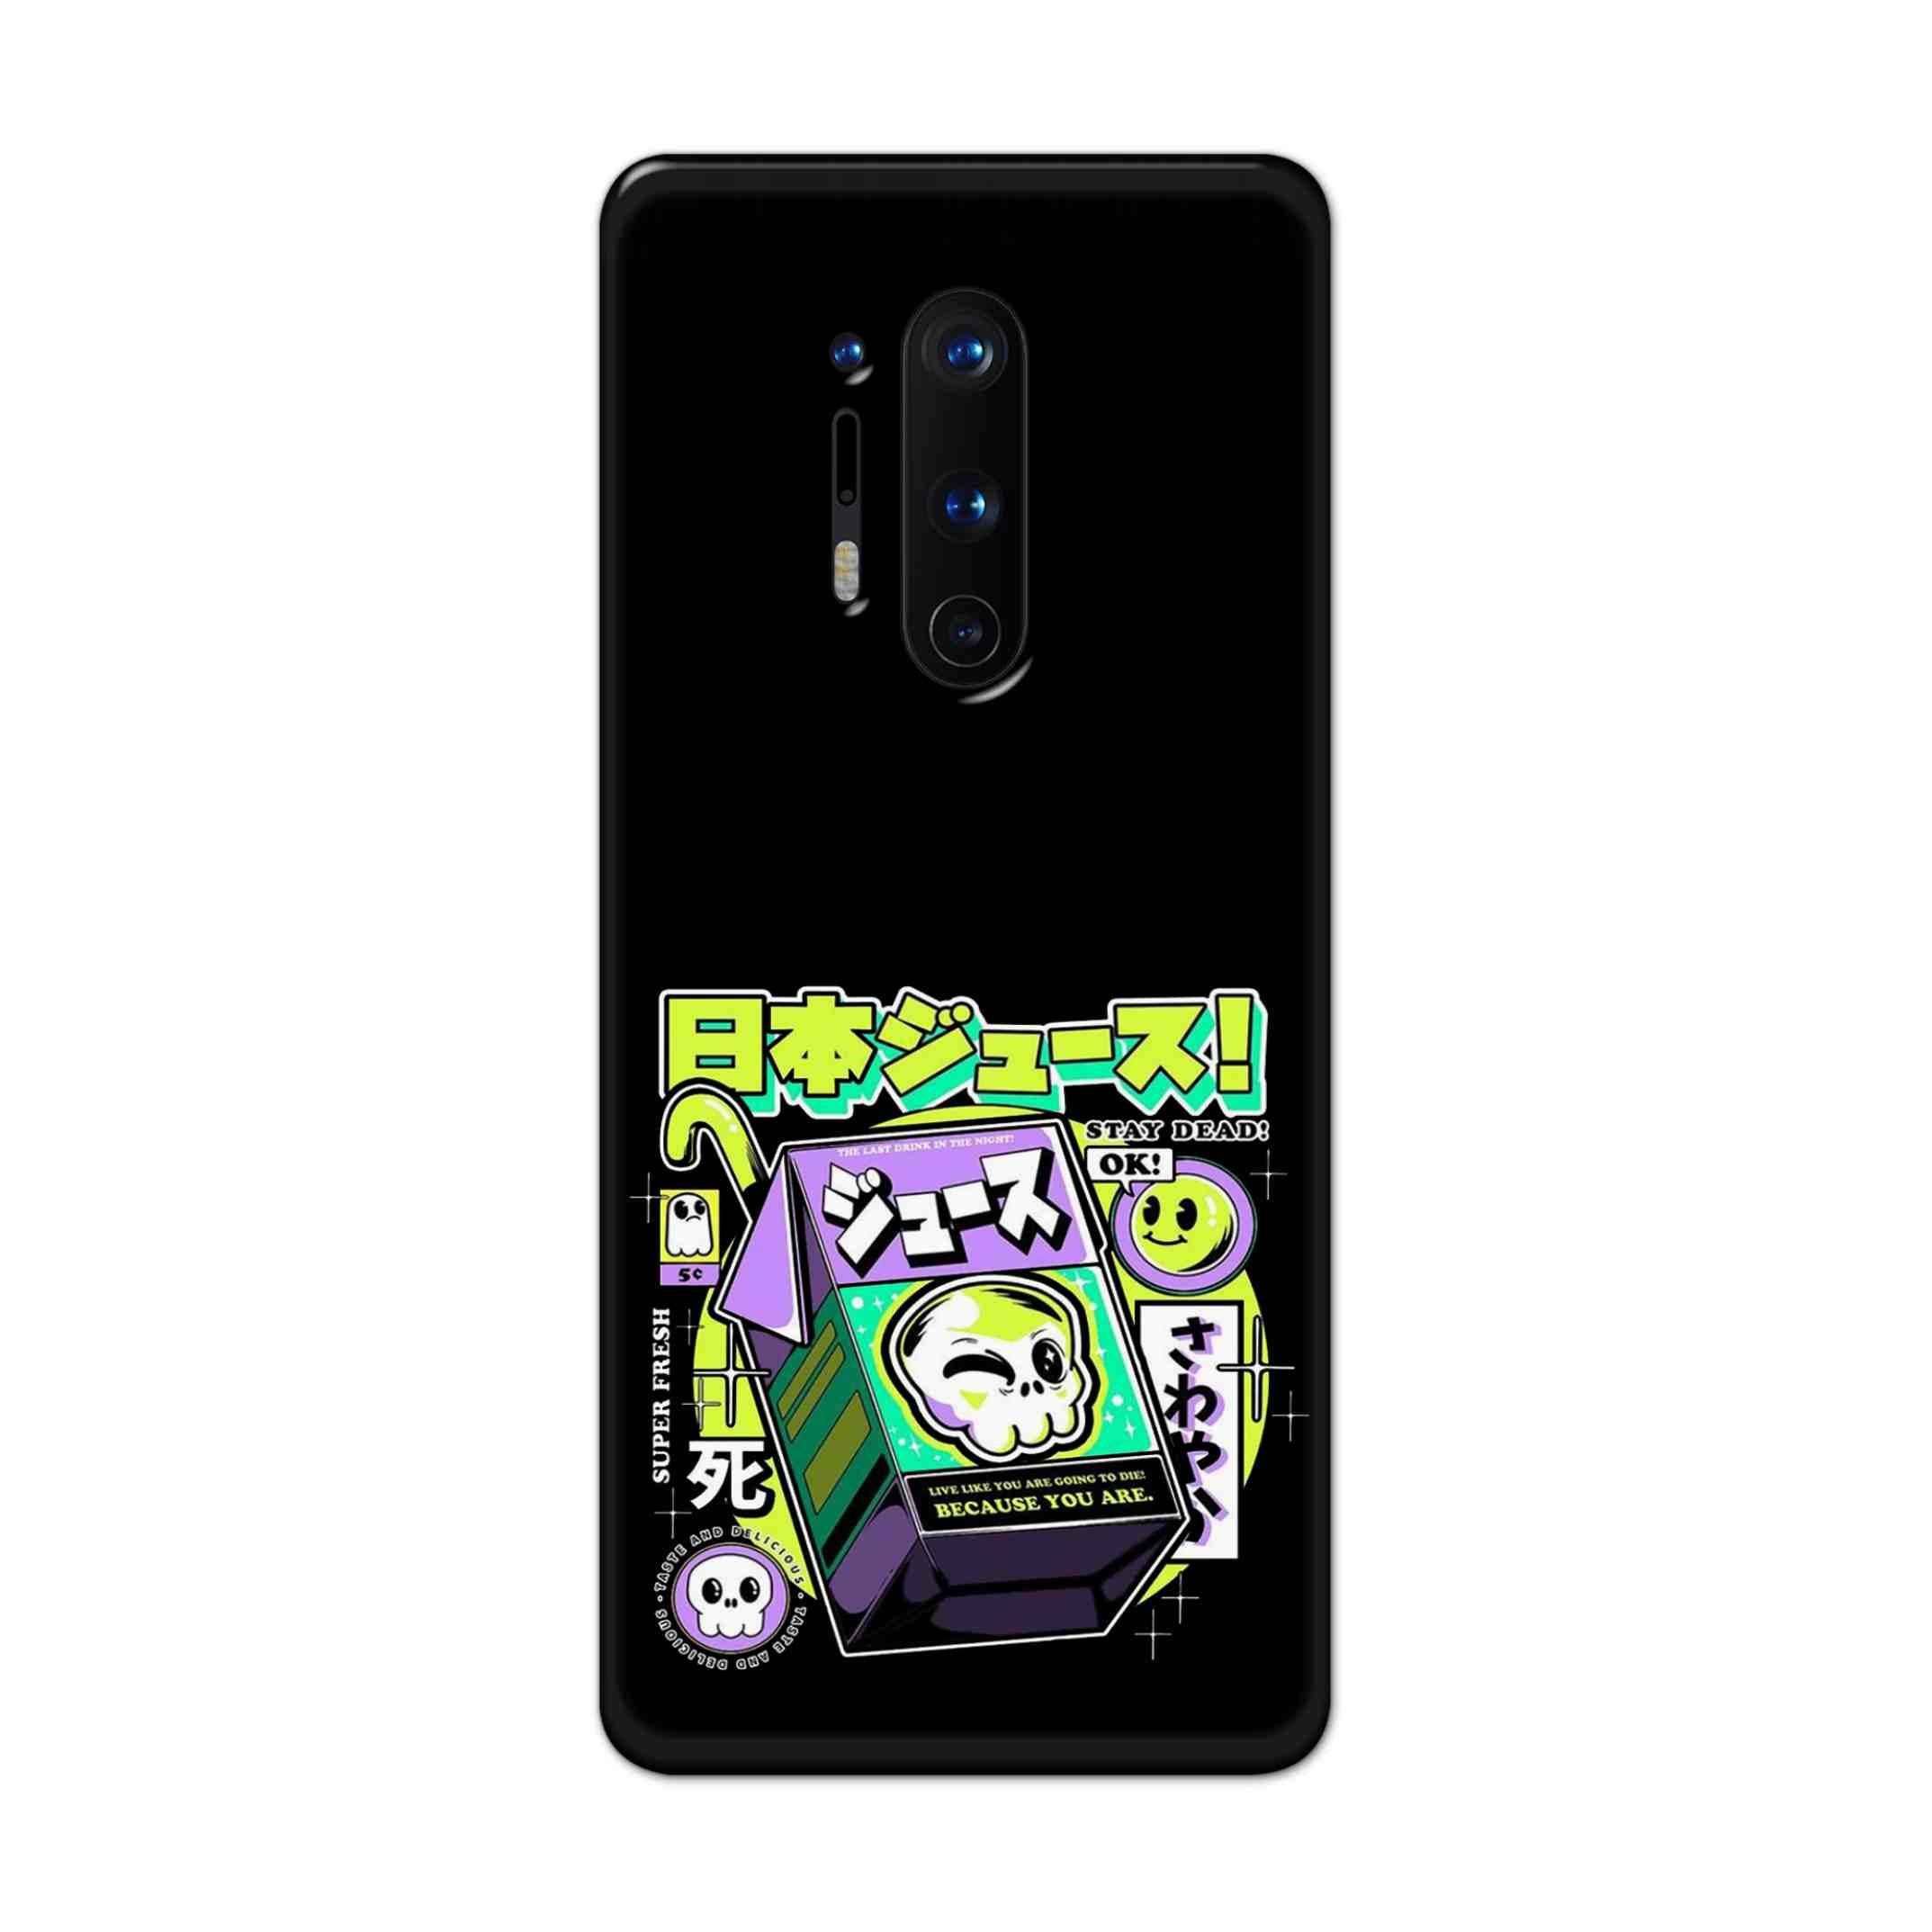 Buy Because You Are Hard Back Mobile Phone Case Cover For OnePlus 8 Pro Online